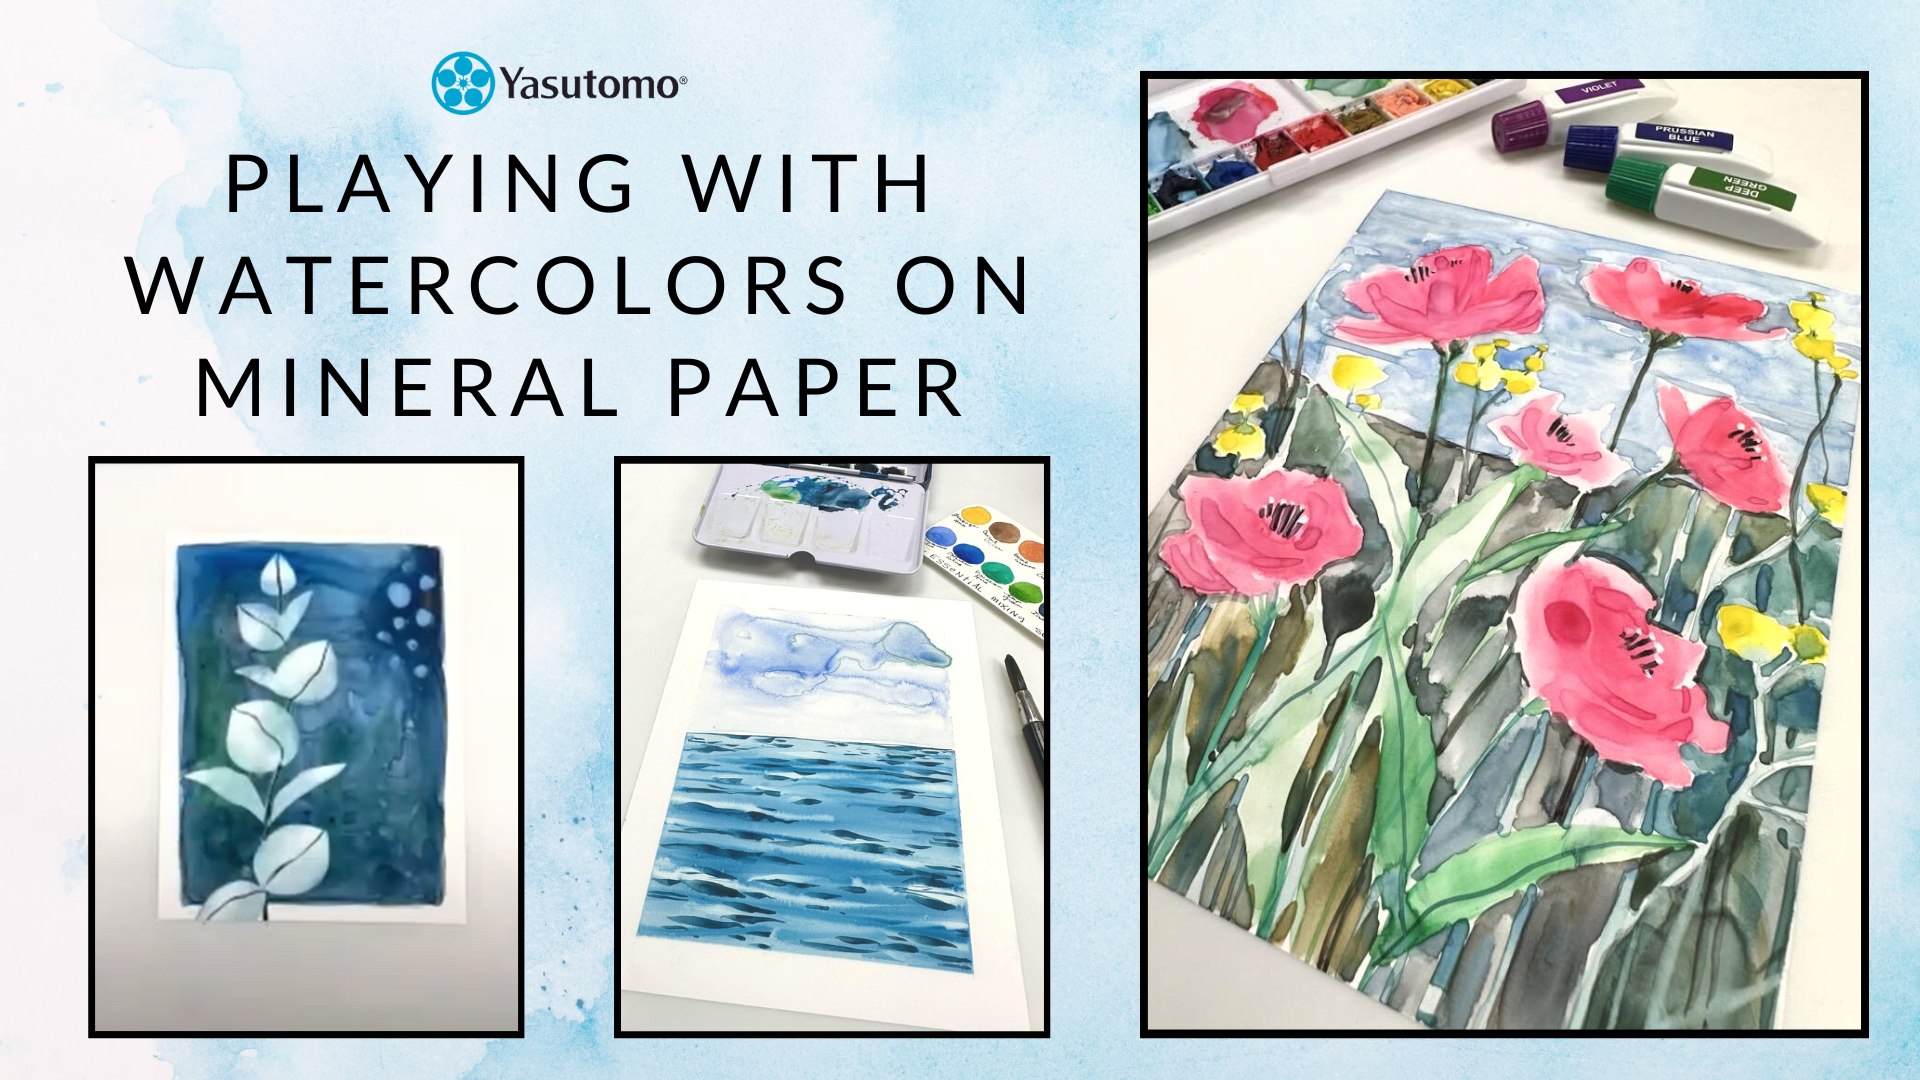 Playing with Watercolors on Mineral Paper – Yasutomo